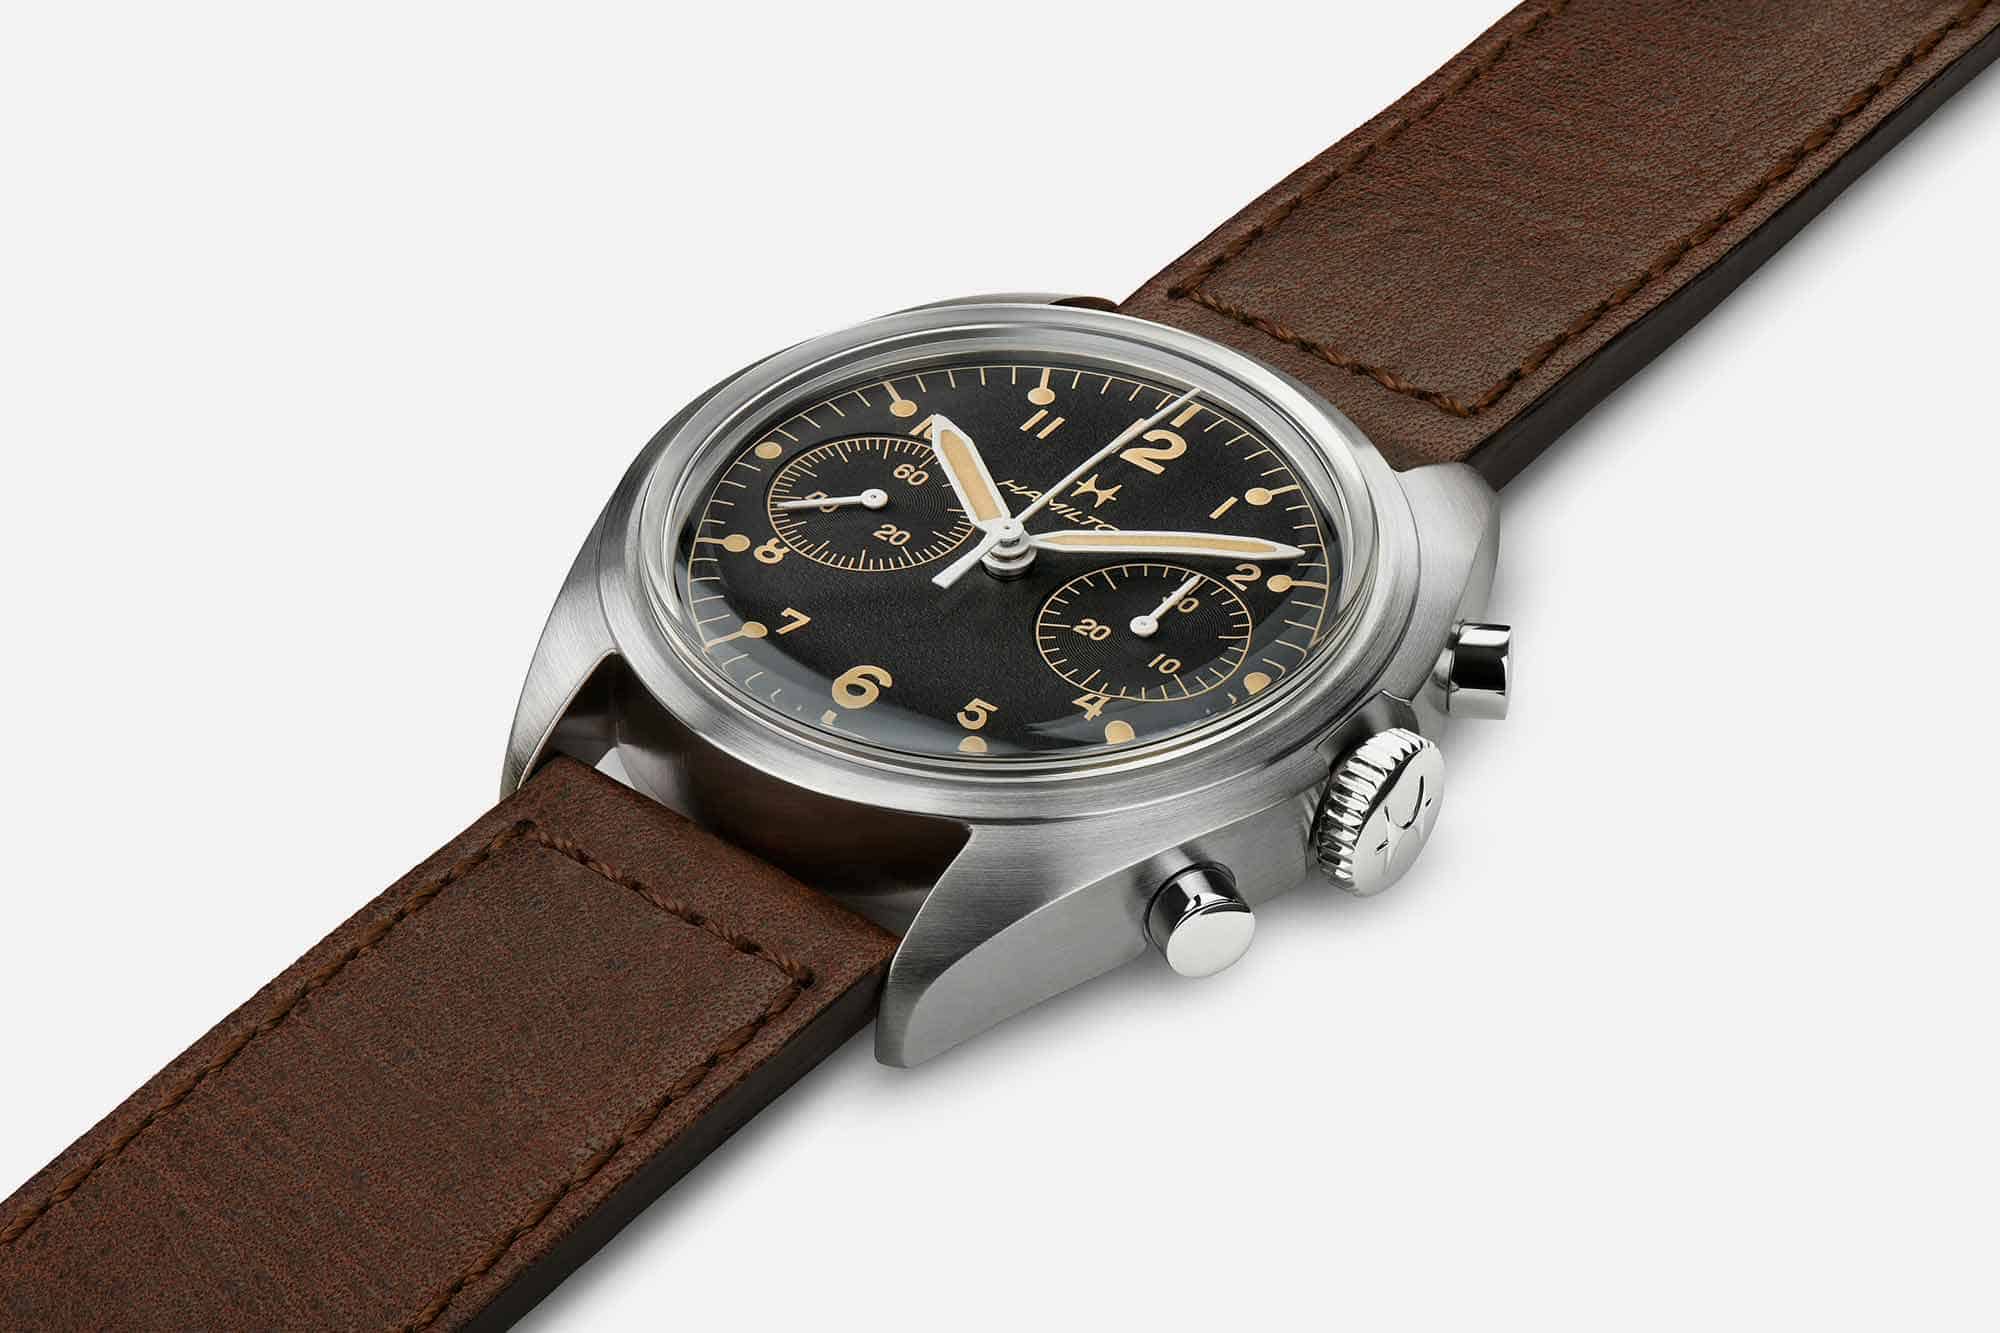 Hamilton’s Latest Chronograph is Inspired by 70s Pilot Watches